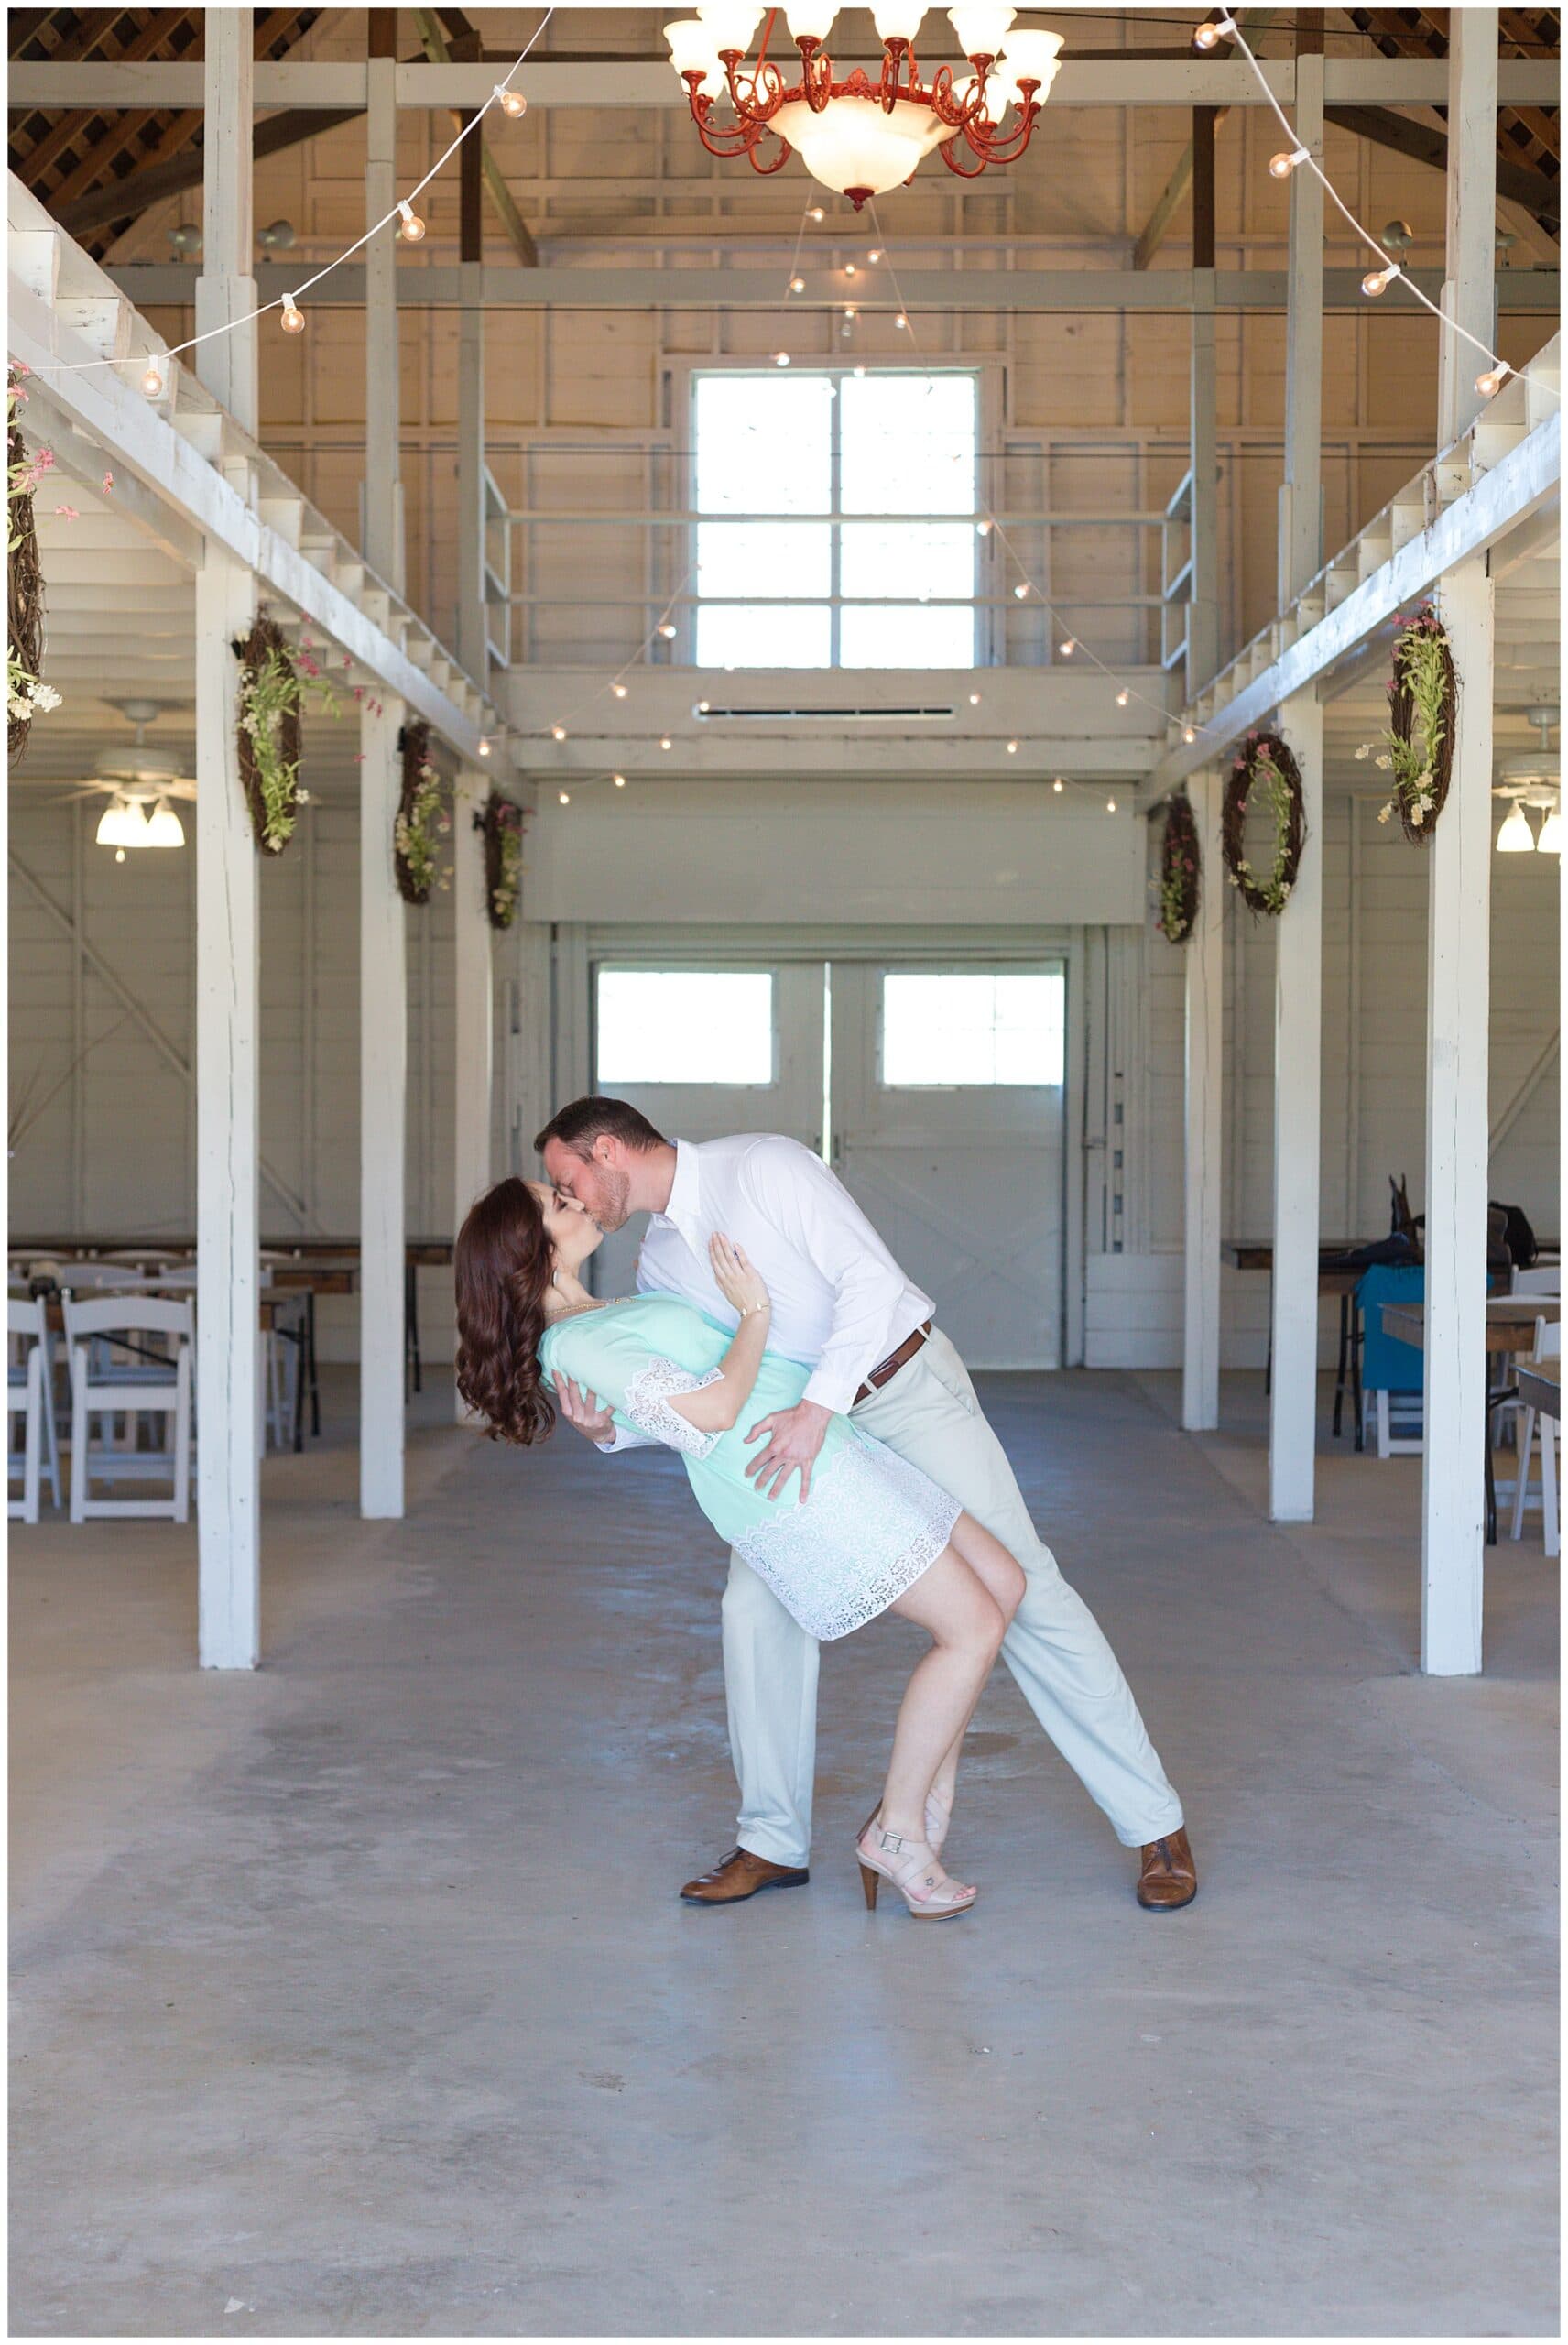 Magical engagements session at the Grand Texana in Houston, Texas photographed by Swish and Click Photography